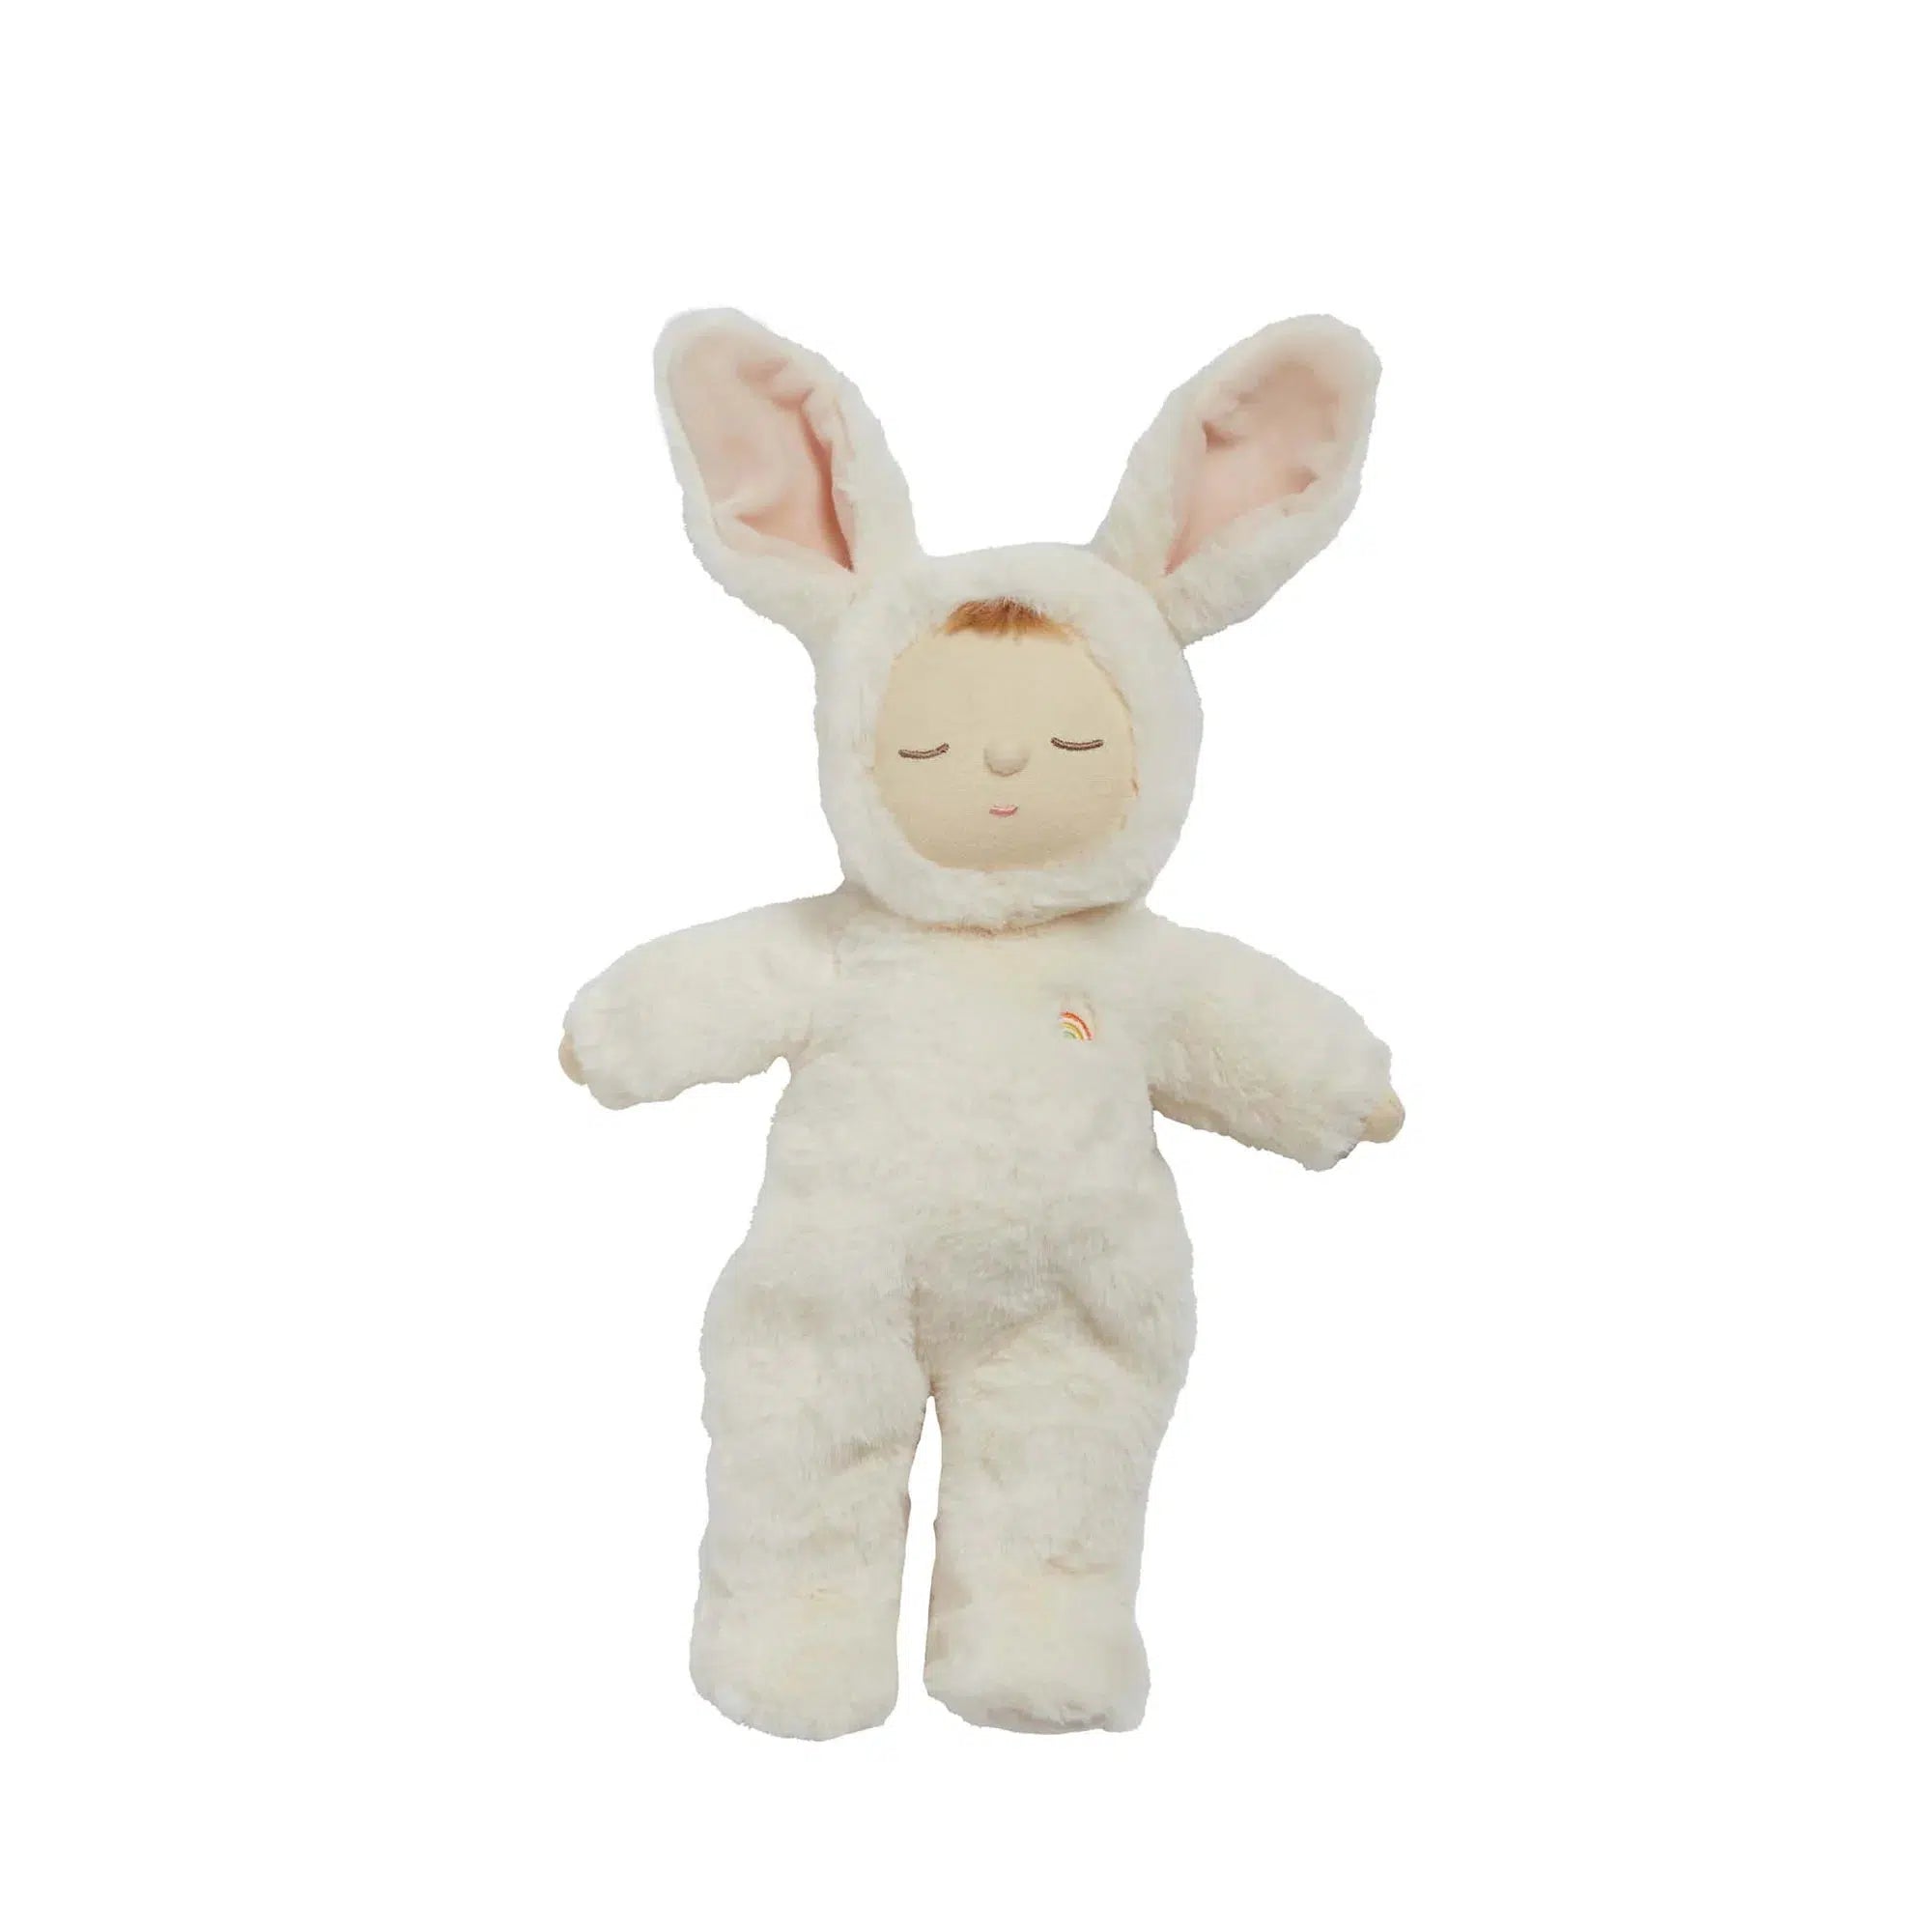 Front view of the Bunny Moppet Doll.